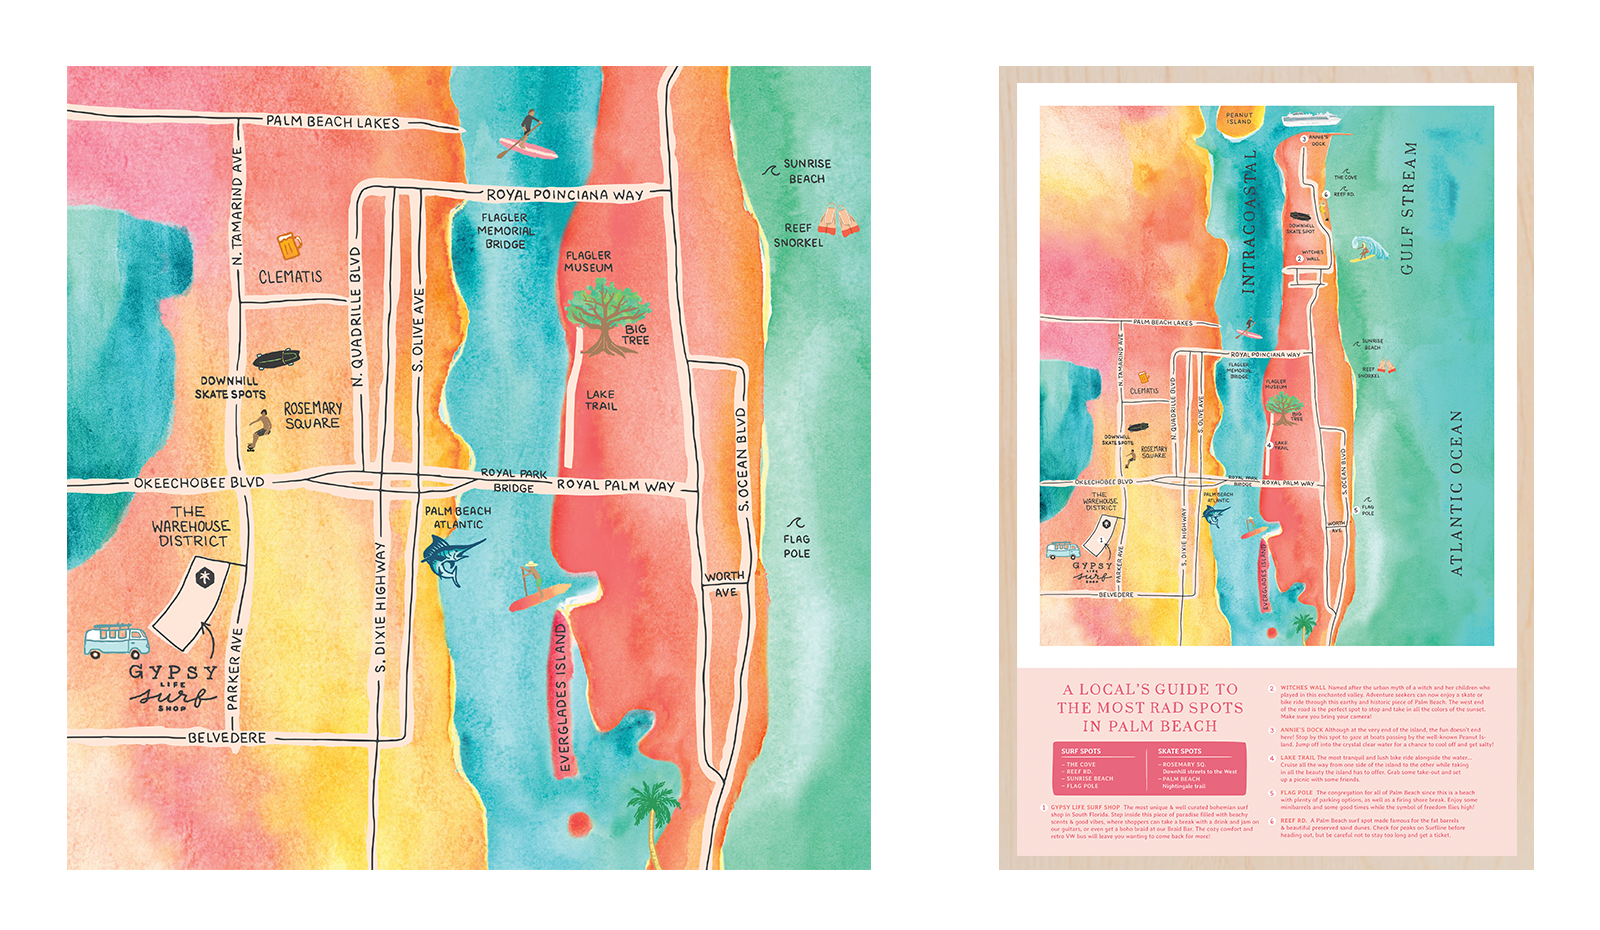 Close up detail shot of Gypsy Life Surf Shop's illustrated watercolor map, featured in their poster design "A Local's Guide to the Most Rad Spots in Palm Beach" which shows off various surf & skate spots around the city along with other activities.